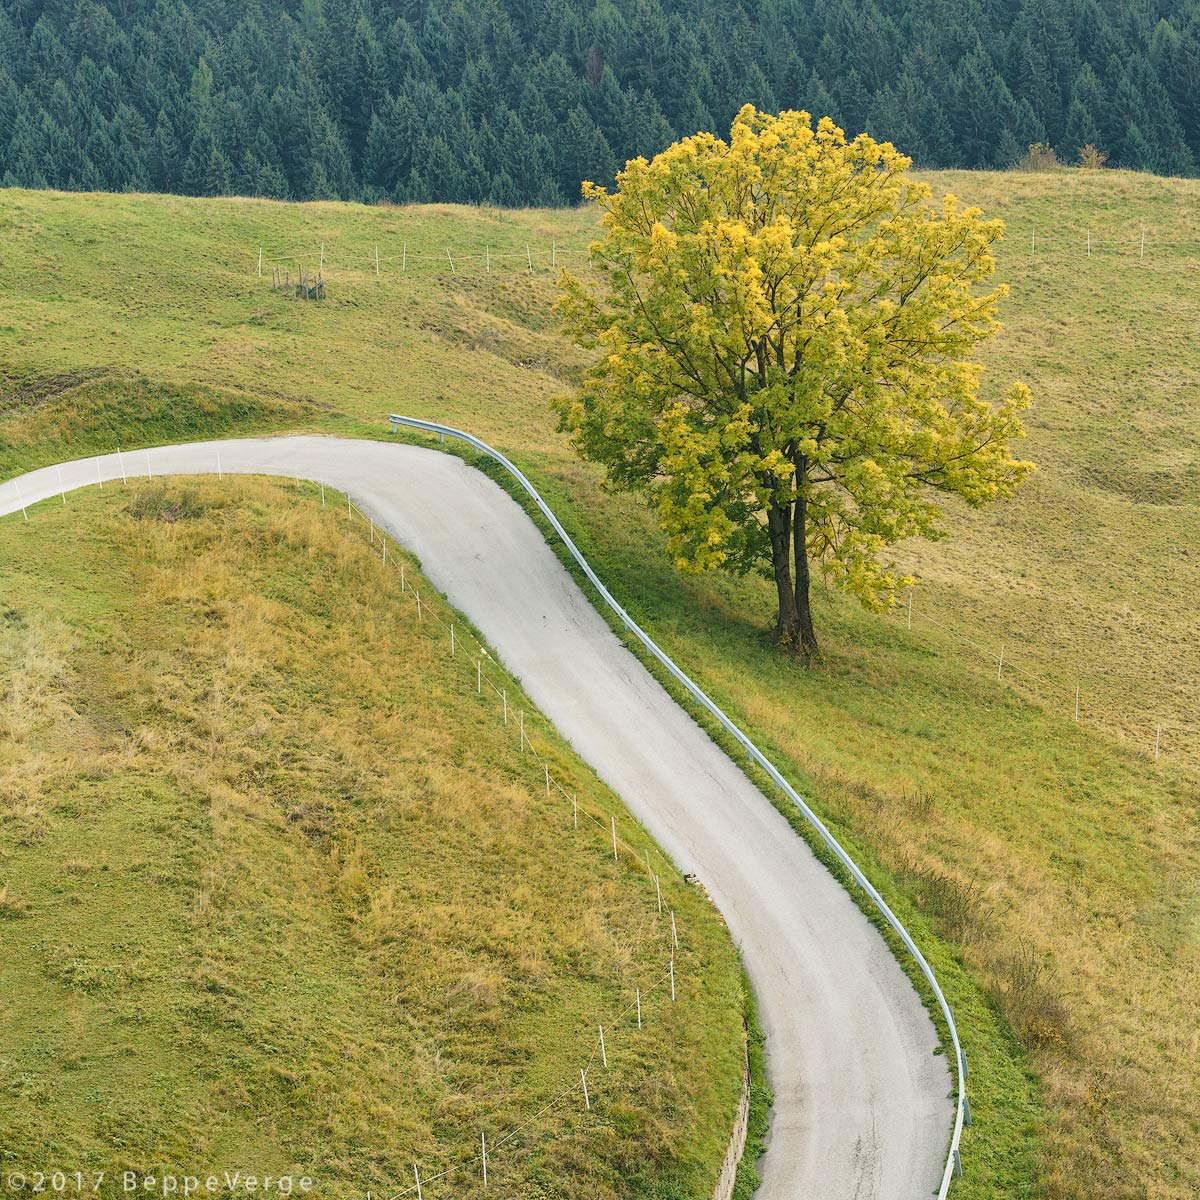 The tree and the road...